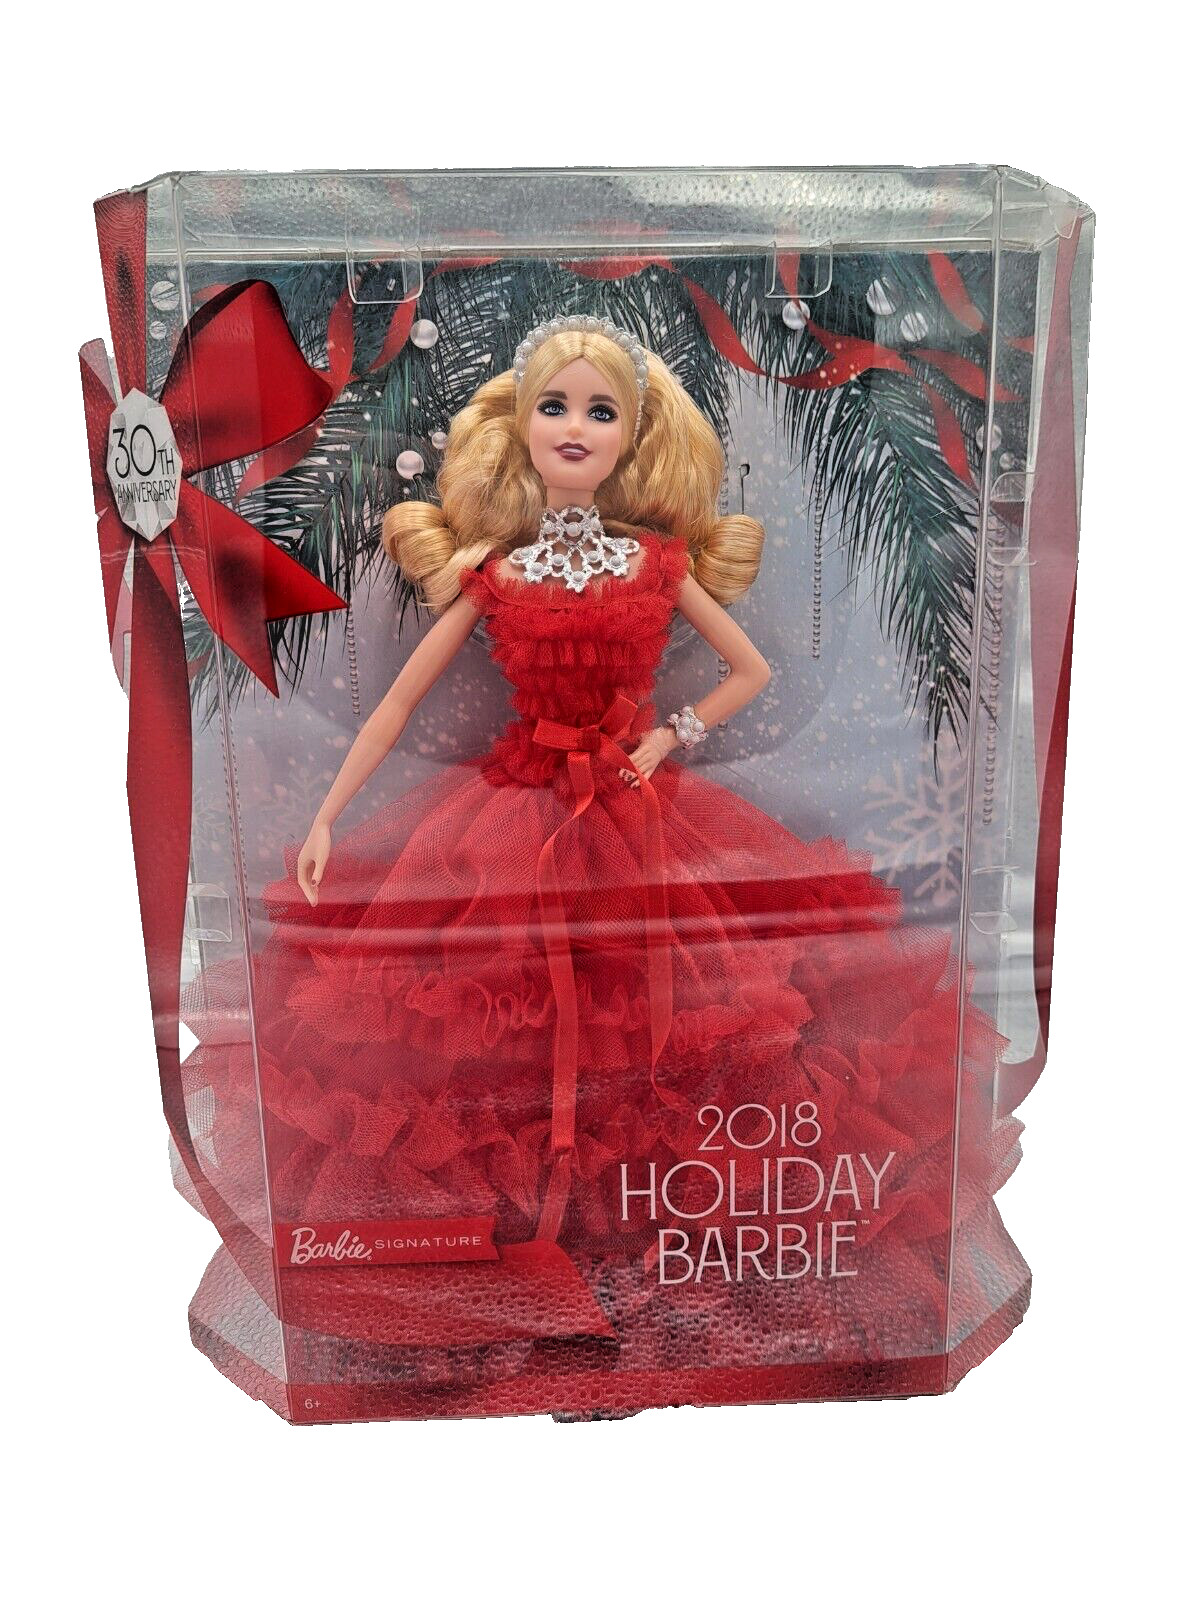 2018 Holiday Barbie Signature Doll 30th Anniversary New Unopened Sealed NRFB